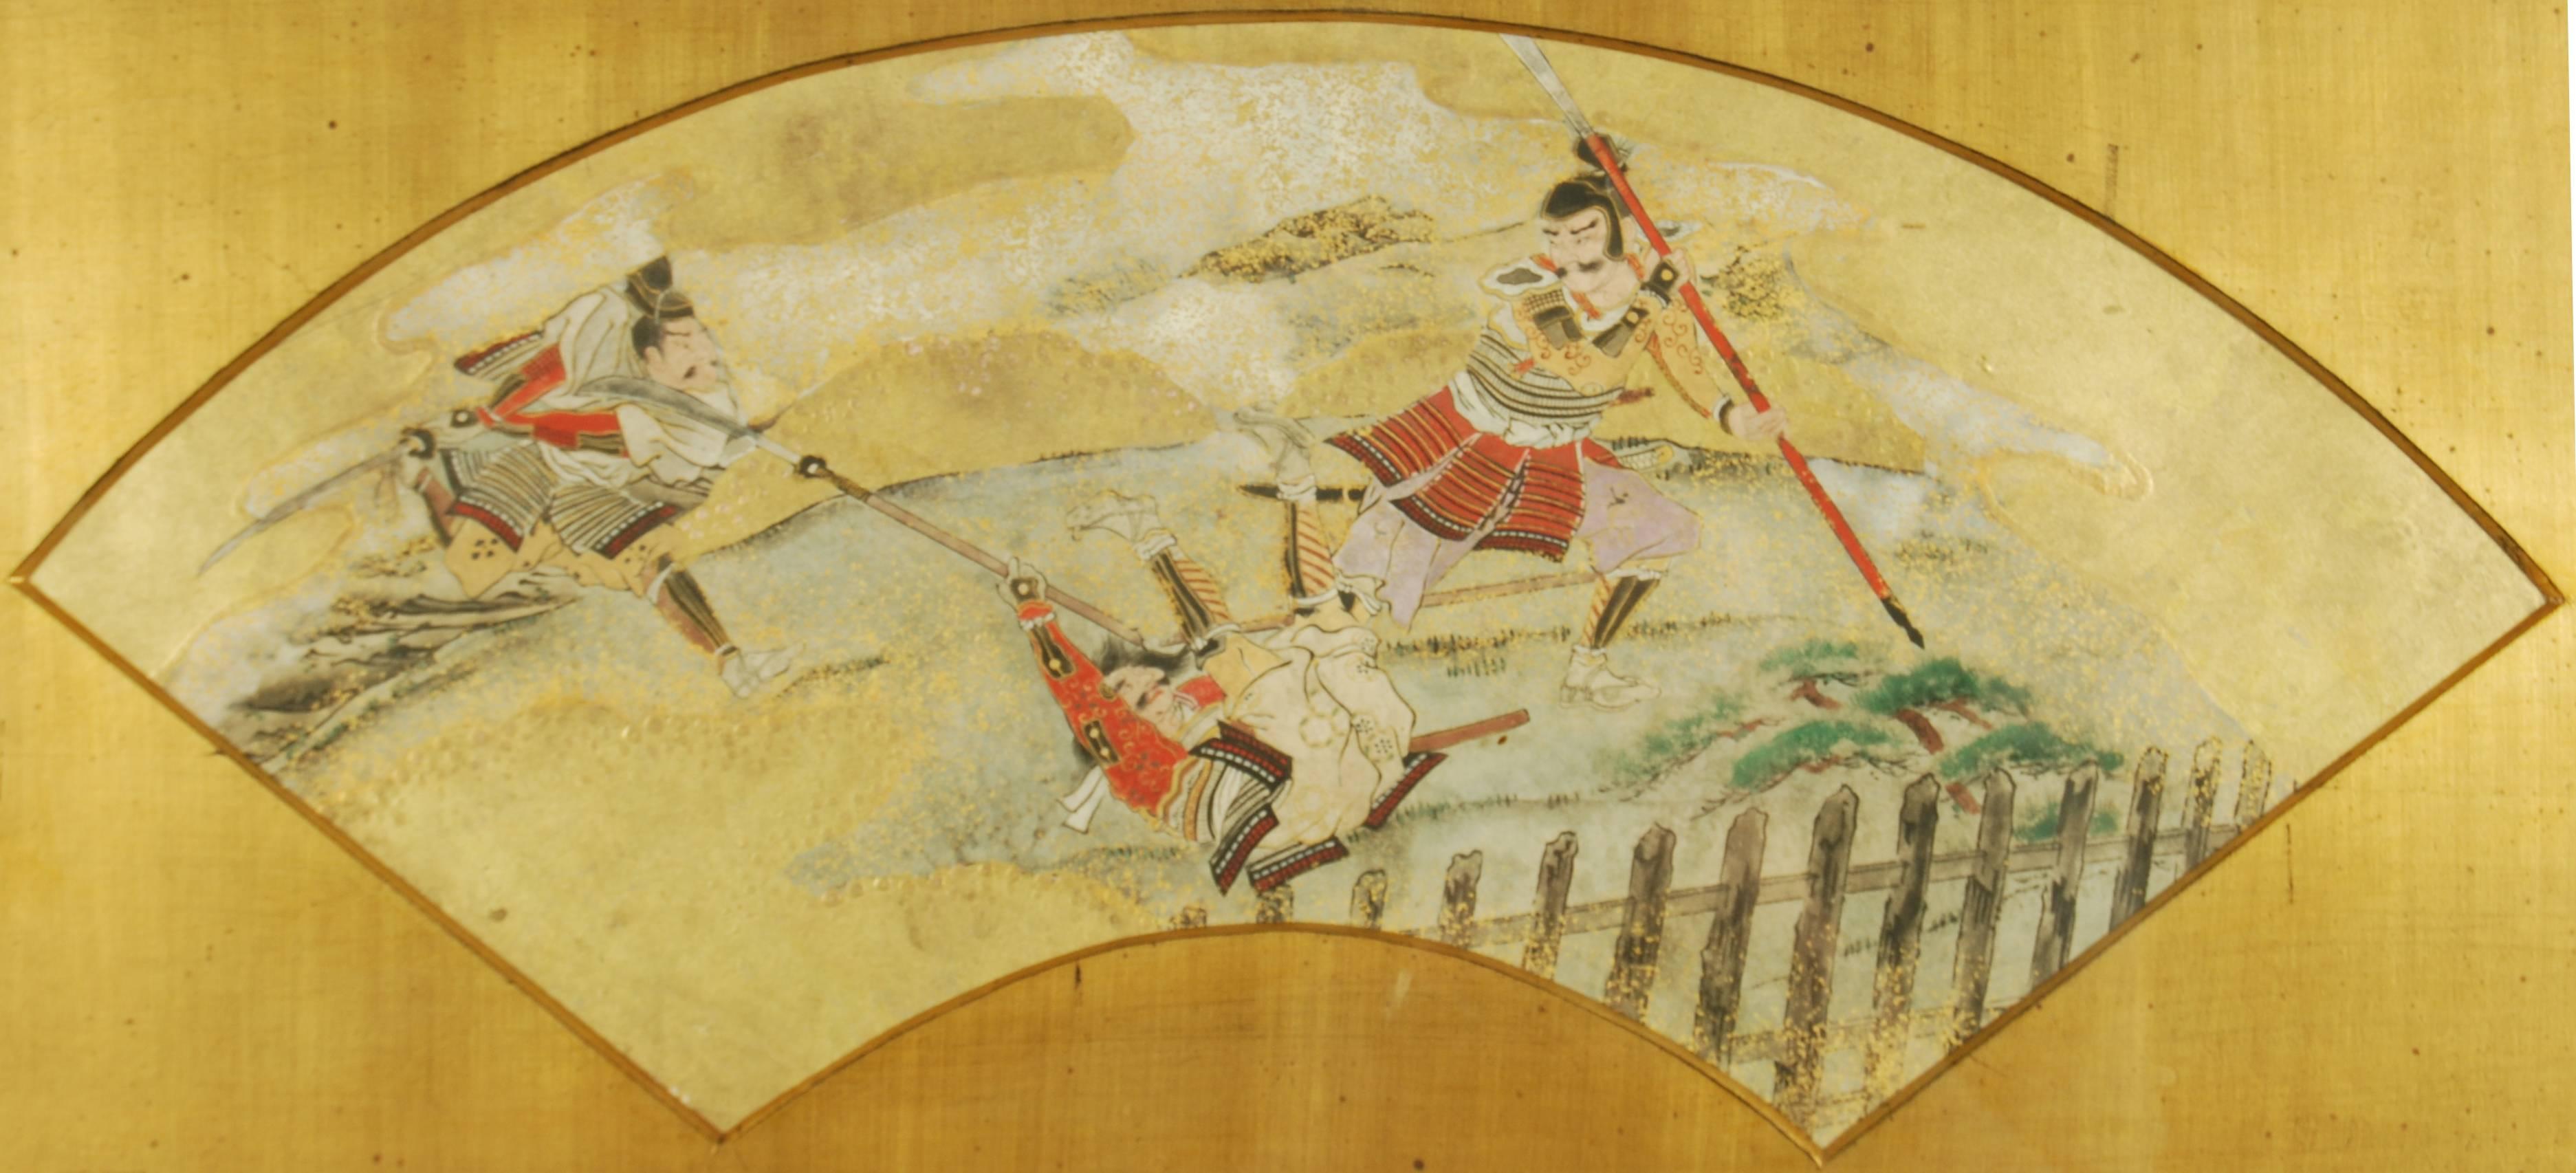 Delicately painted Japanese fan painting with a depiction of samurai warriors engaged in battle, rendered in vibrant mineral pigments and gold leaf on paper with Fine detailing in the faces and elaborate armour costumes of the figures, middle Edo